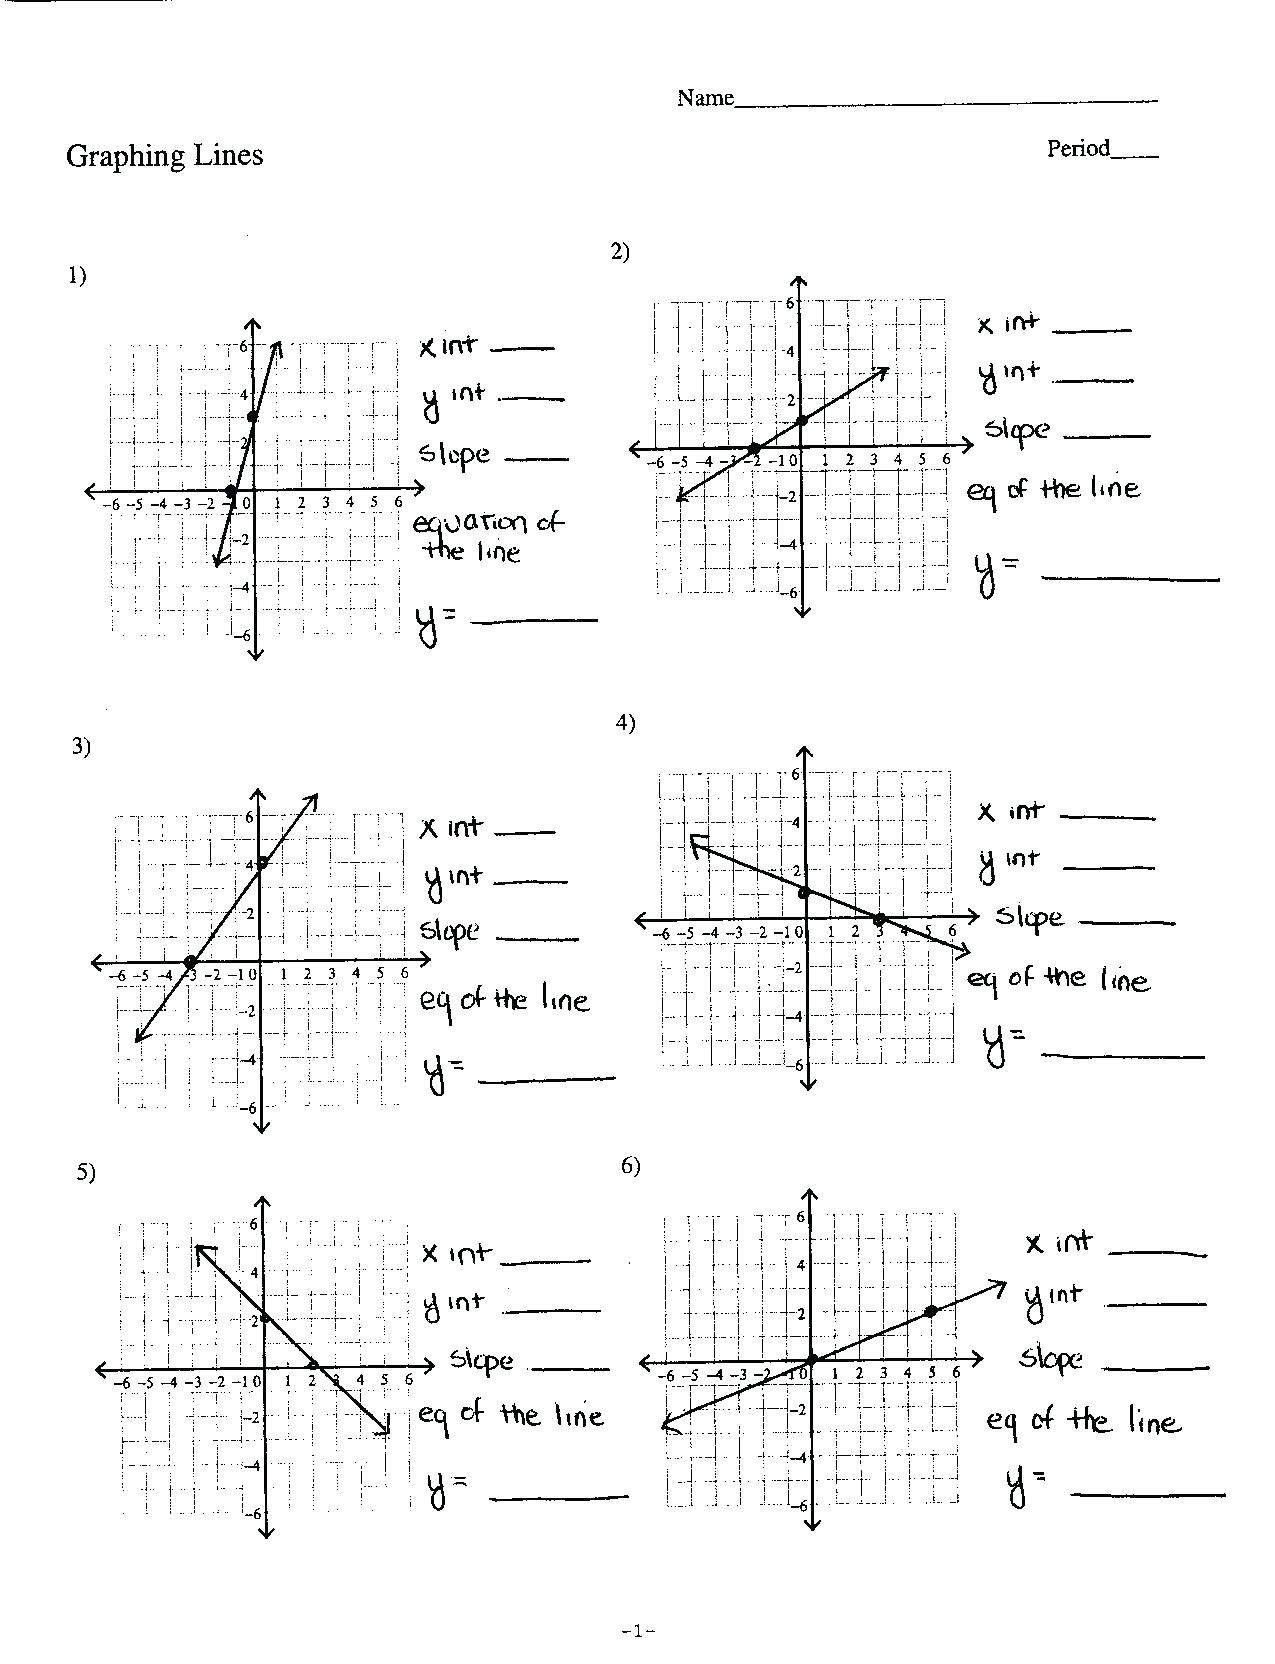 Graphing Linear Equations Practice Worksheet Worksheets 49 Splendi Graphing Linear Equations Worksheet